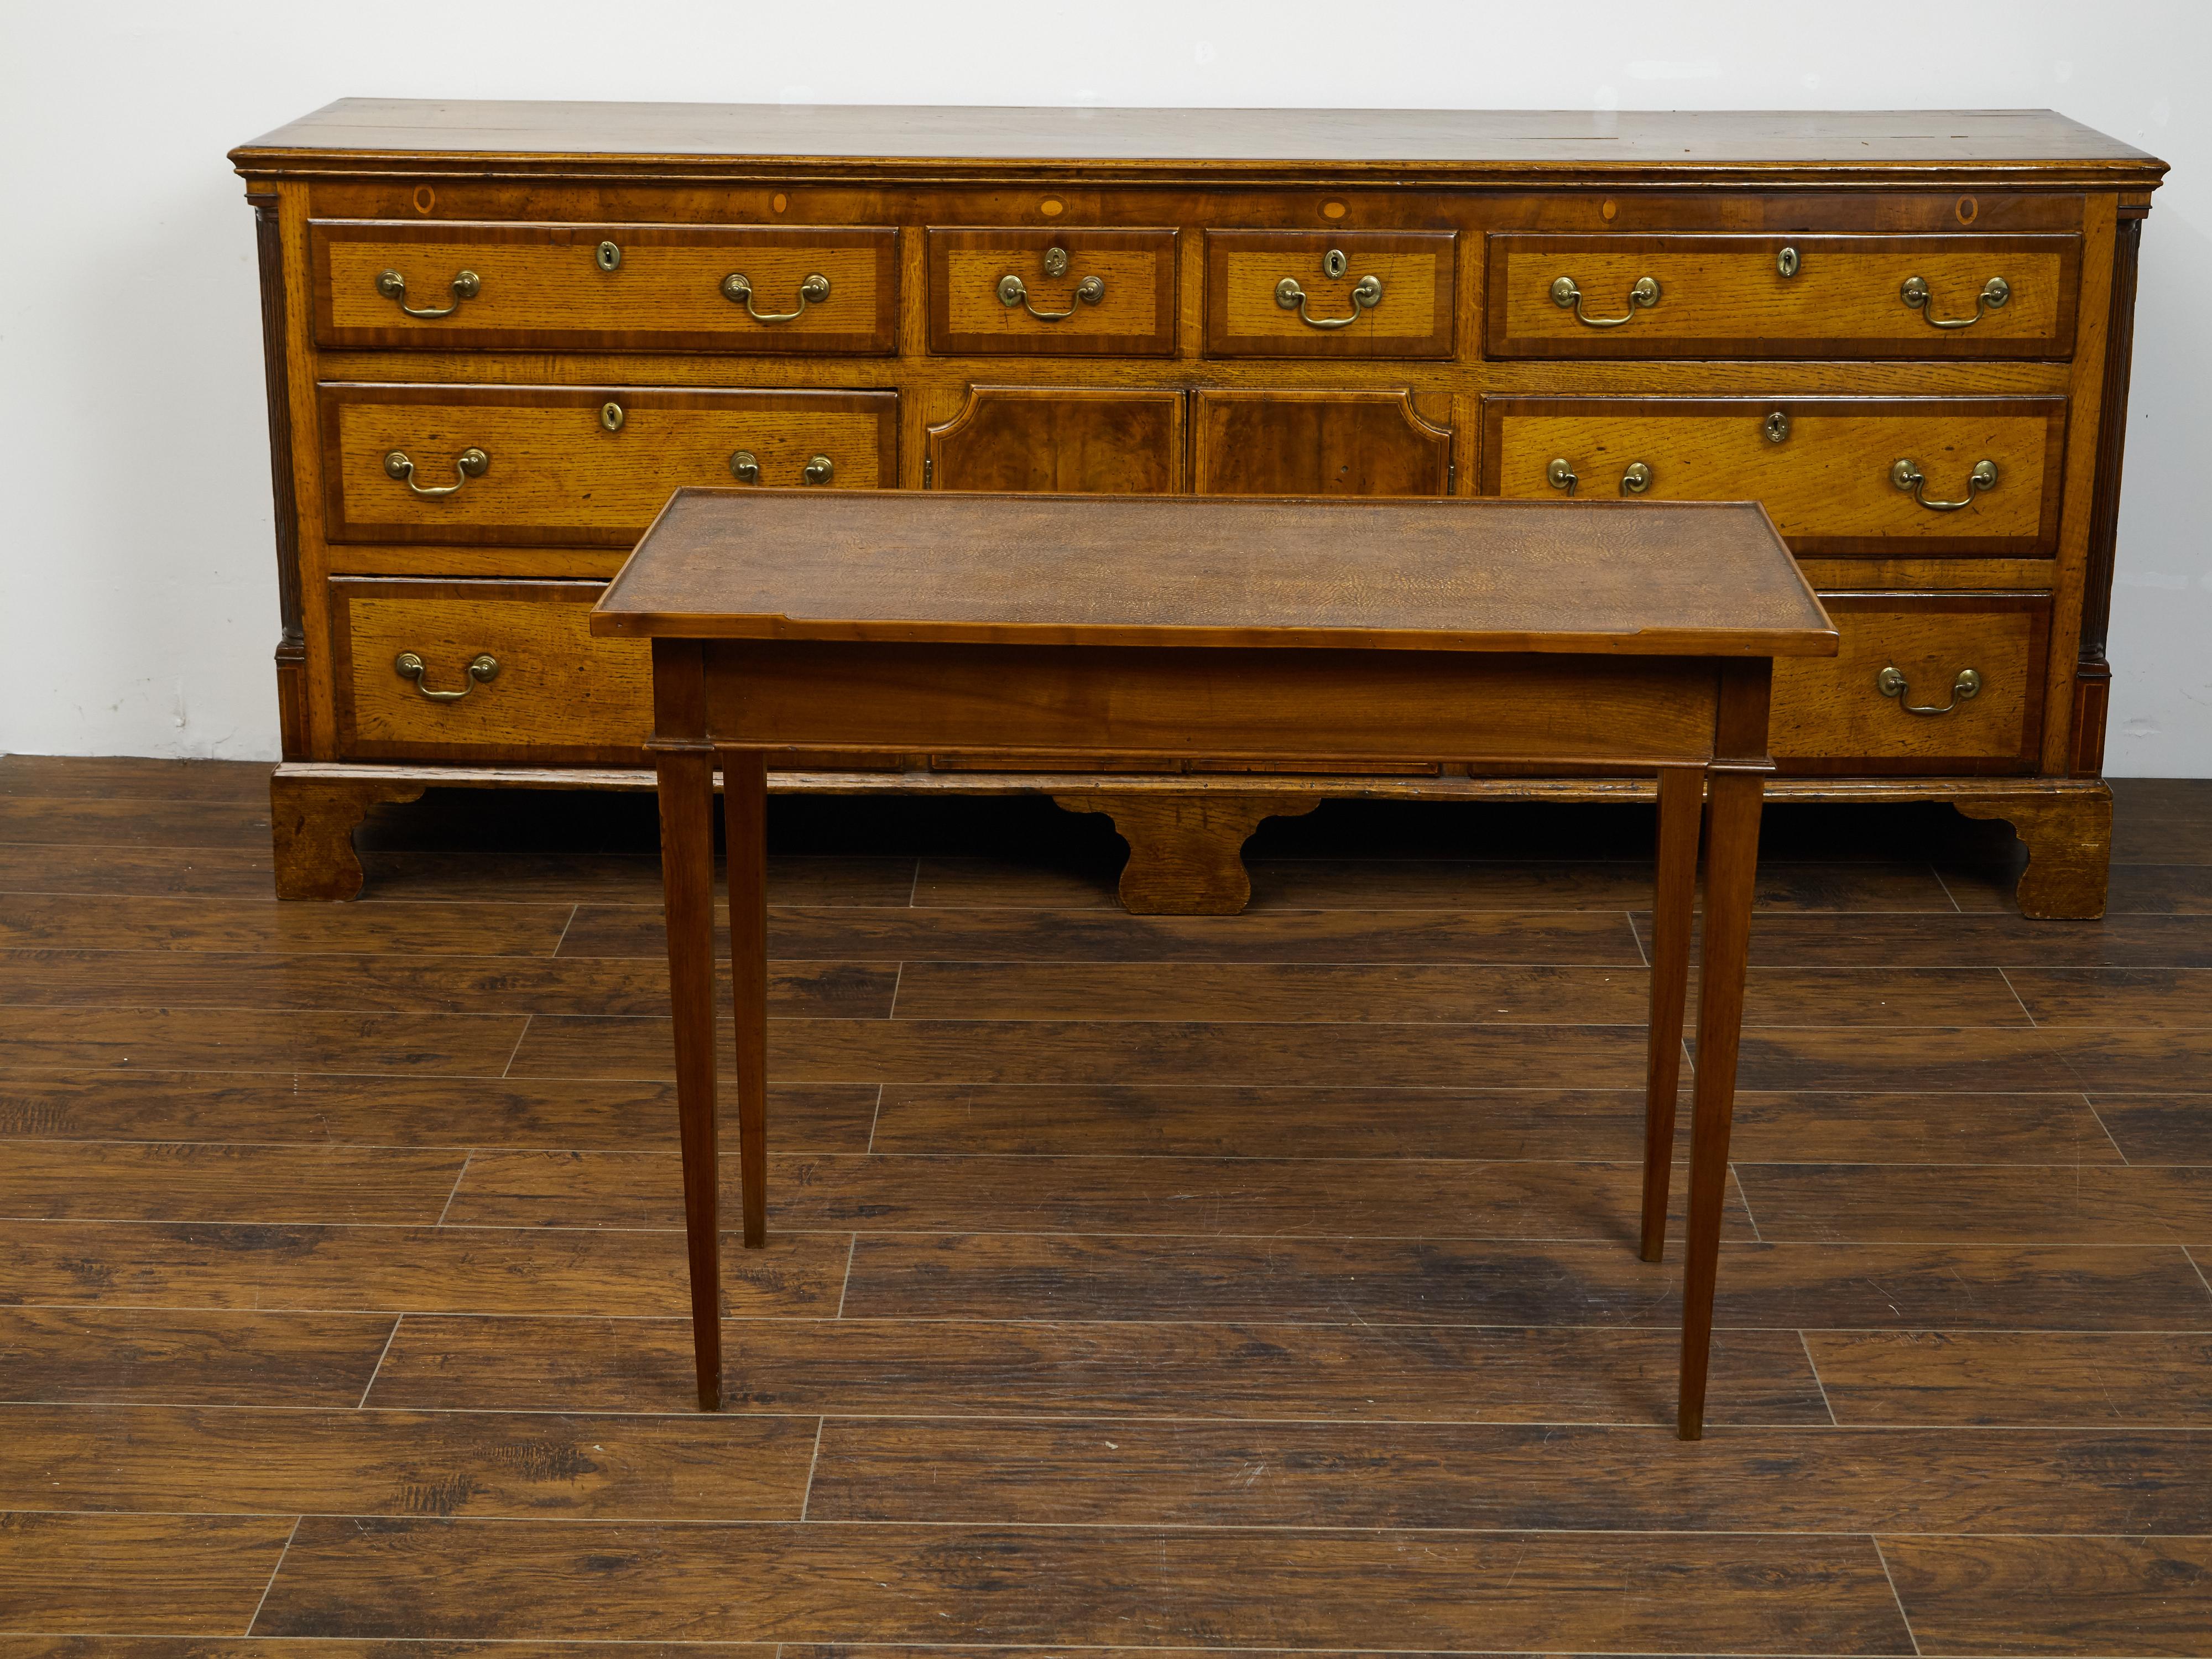 A French Restauration period wooden side table from the early 19th century, with leather top, lateral drawer and tapered legs. Created in France during the Restauration period, this side table features a rectangular leather top sitting above an